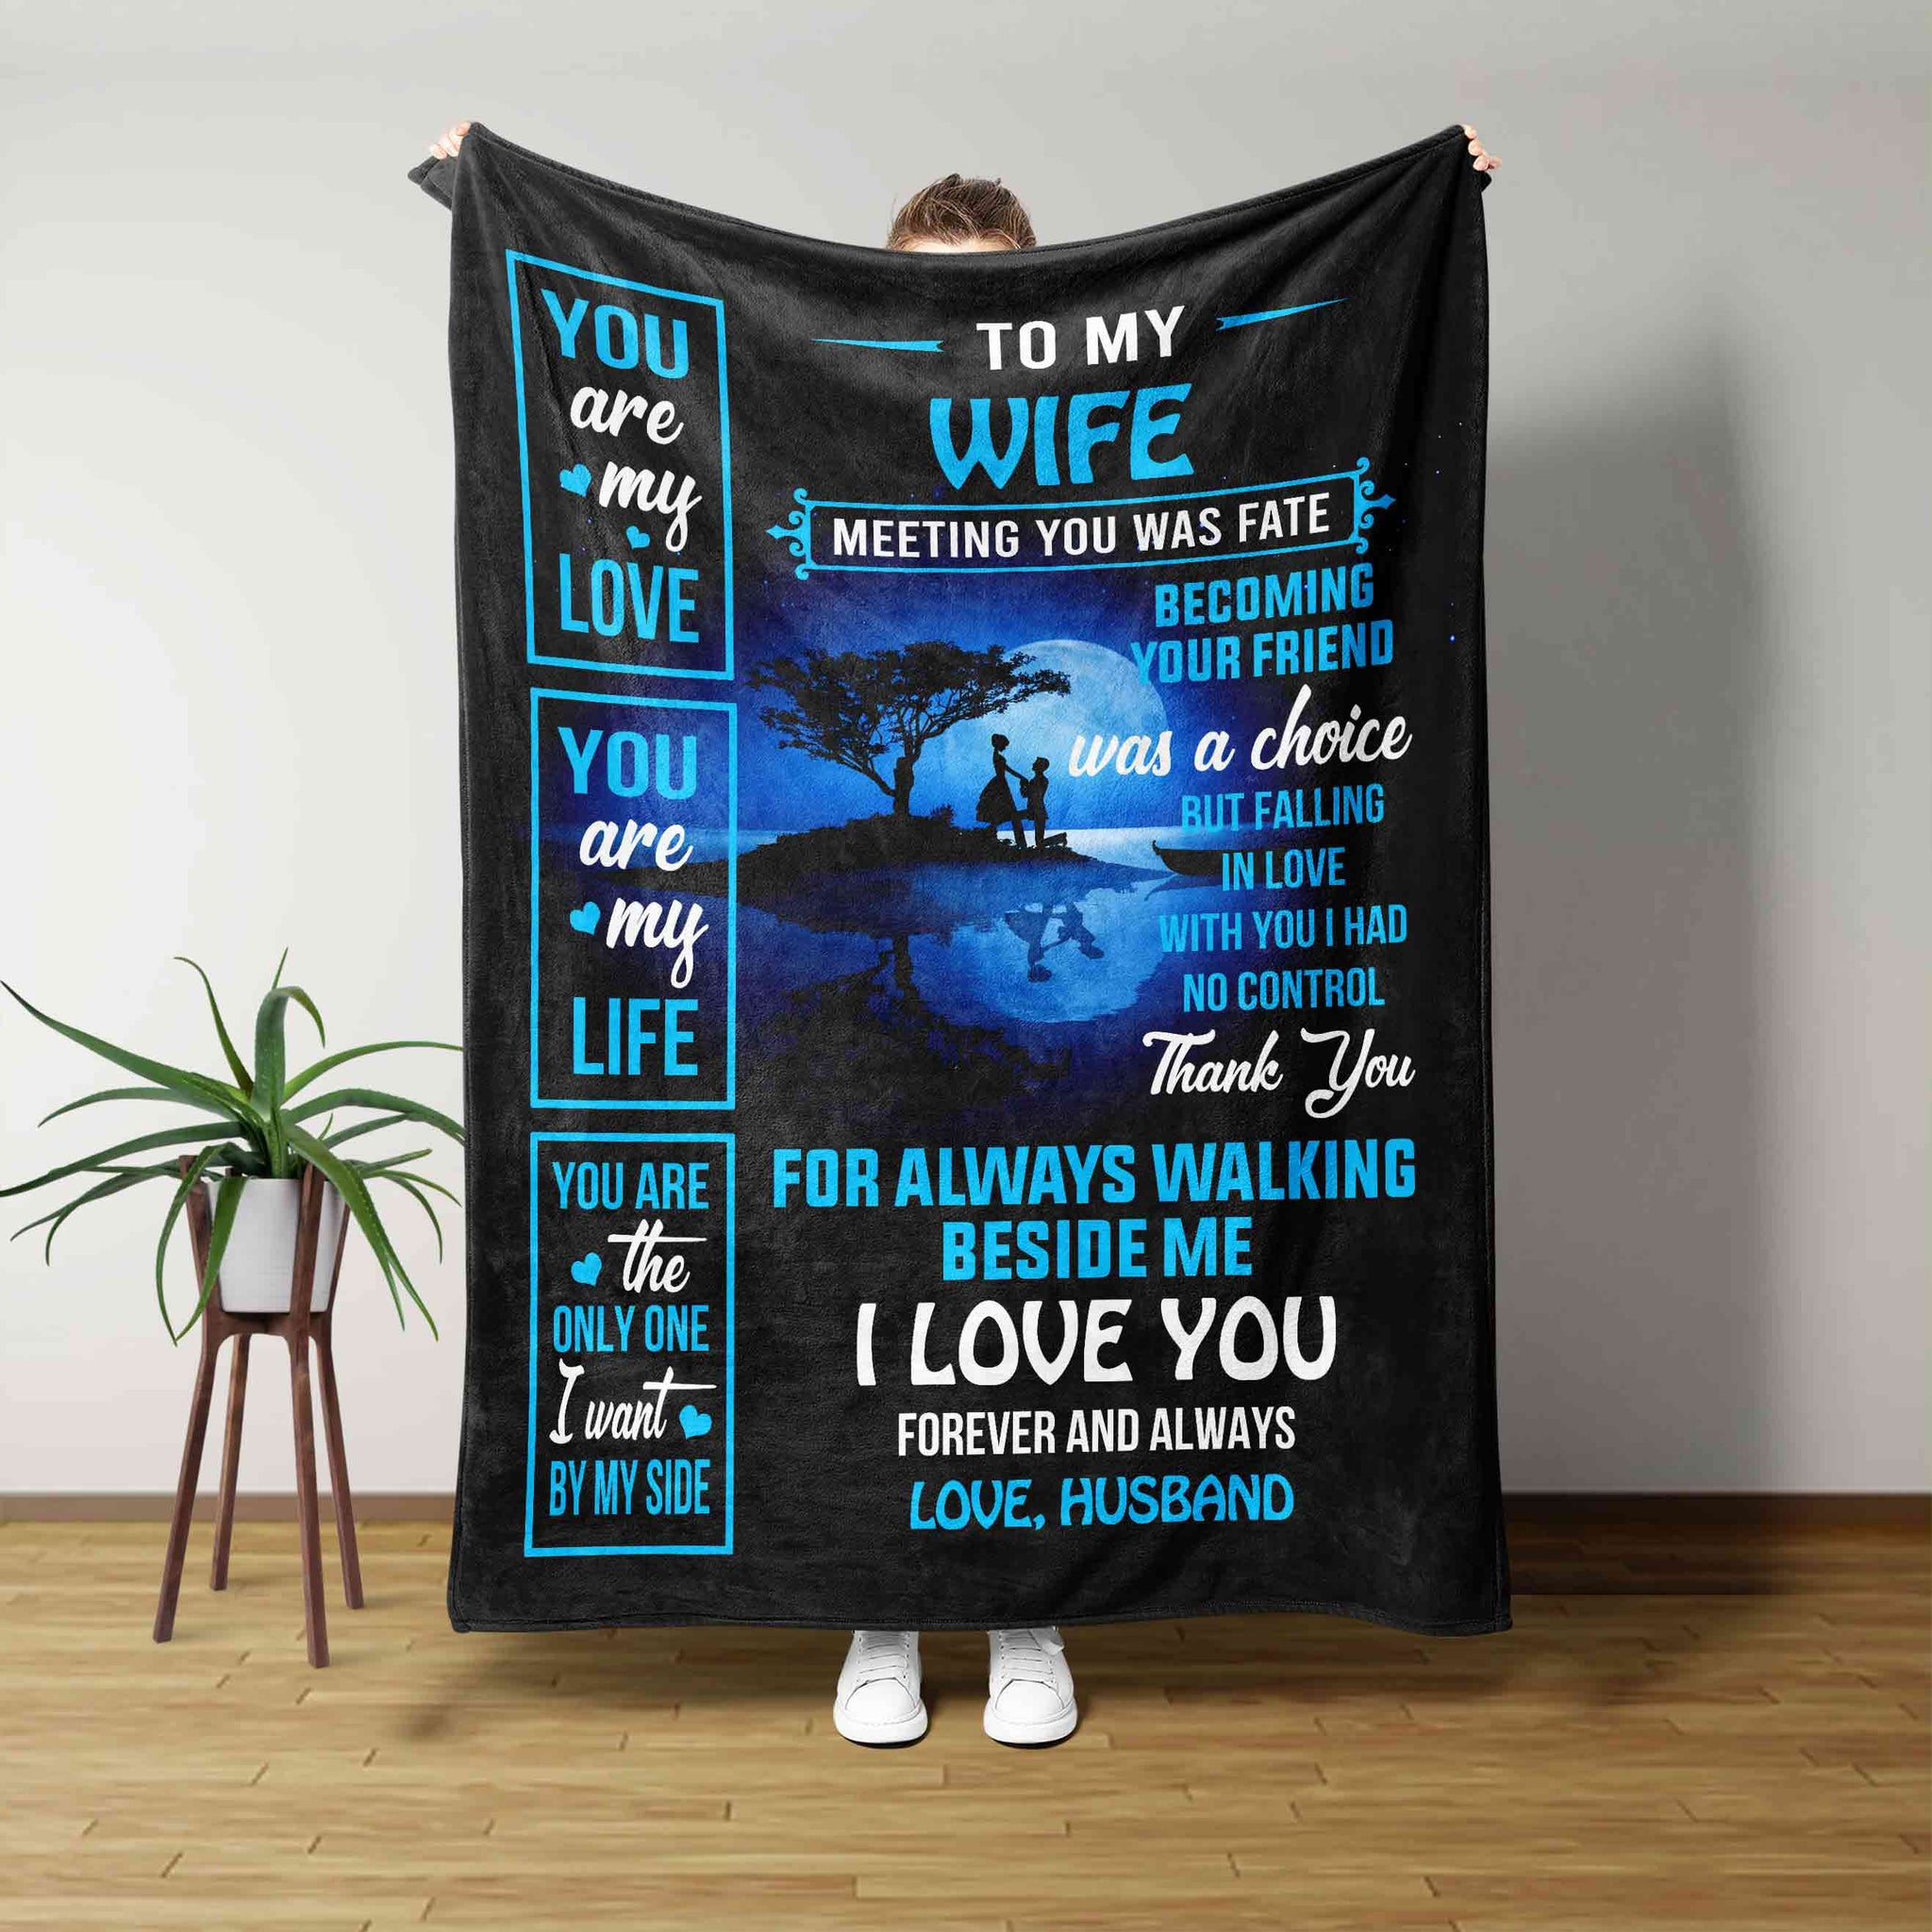 Personalized Name Blanket, To My Wife Blanket, You Are My Love Blanket, Gift Blanket